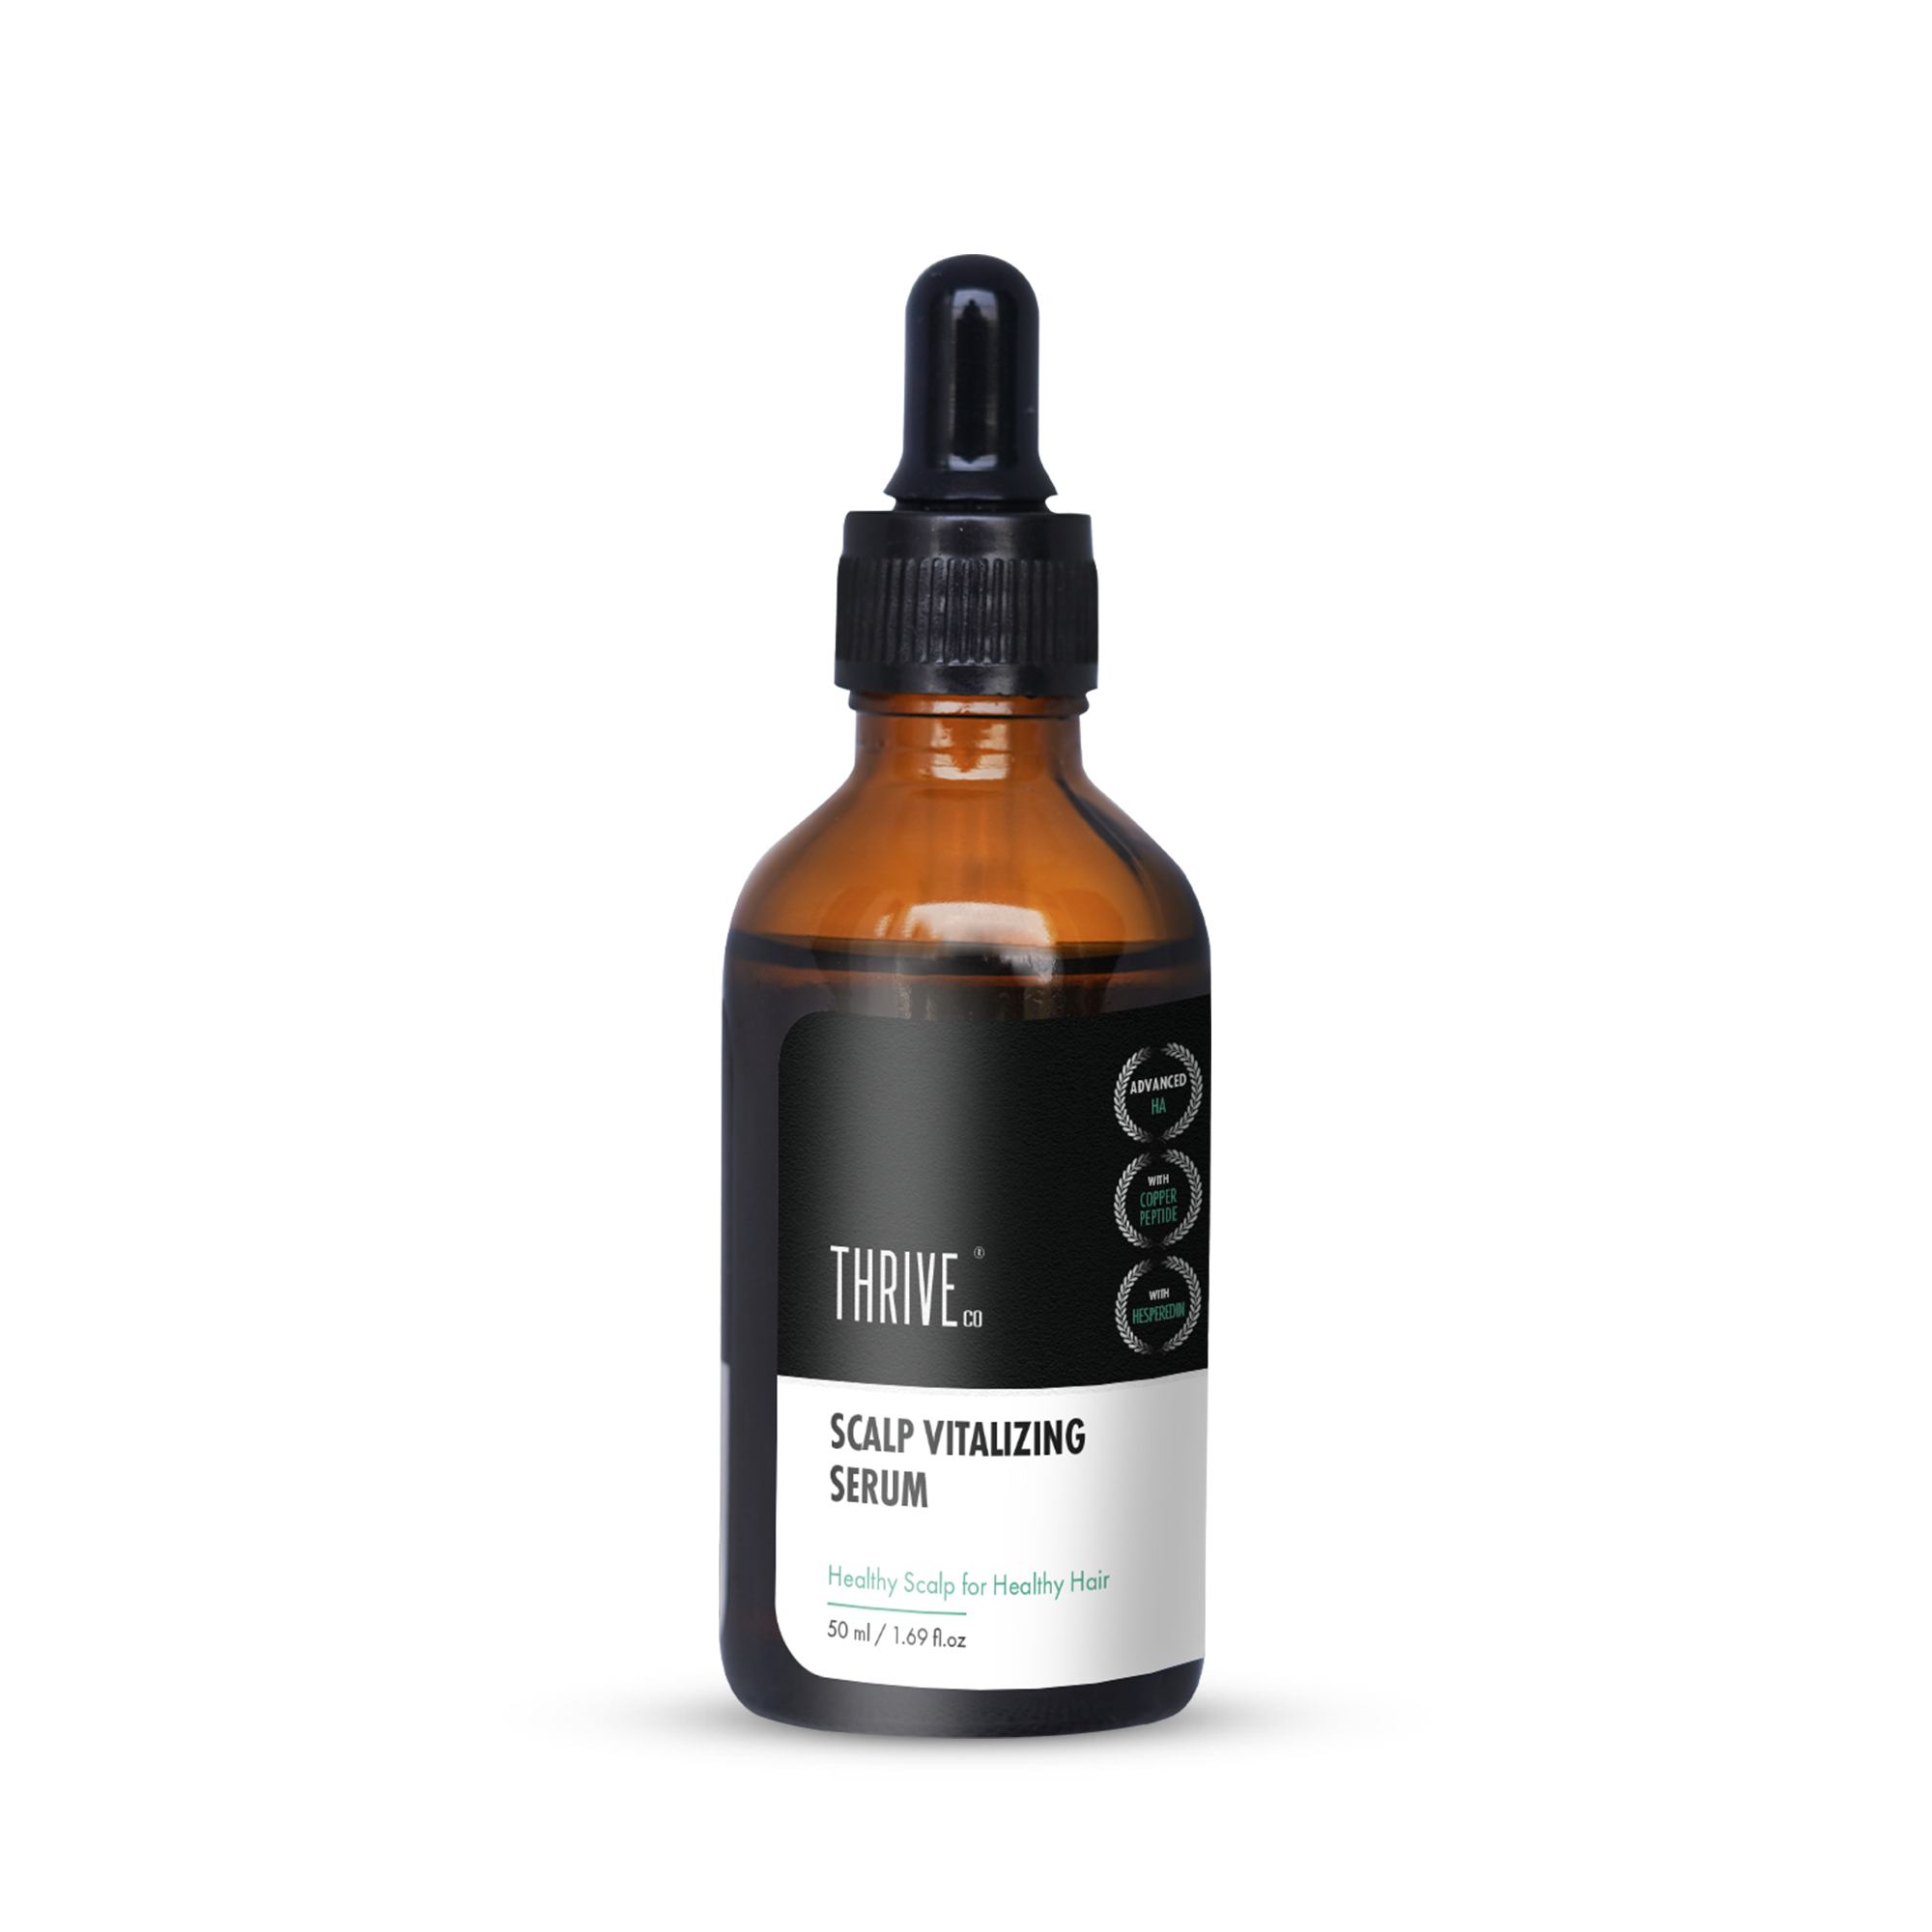 thriveco scalp vitalizing serum for strong hair from roots